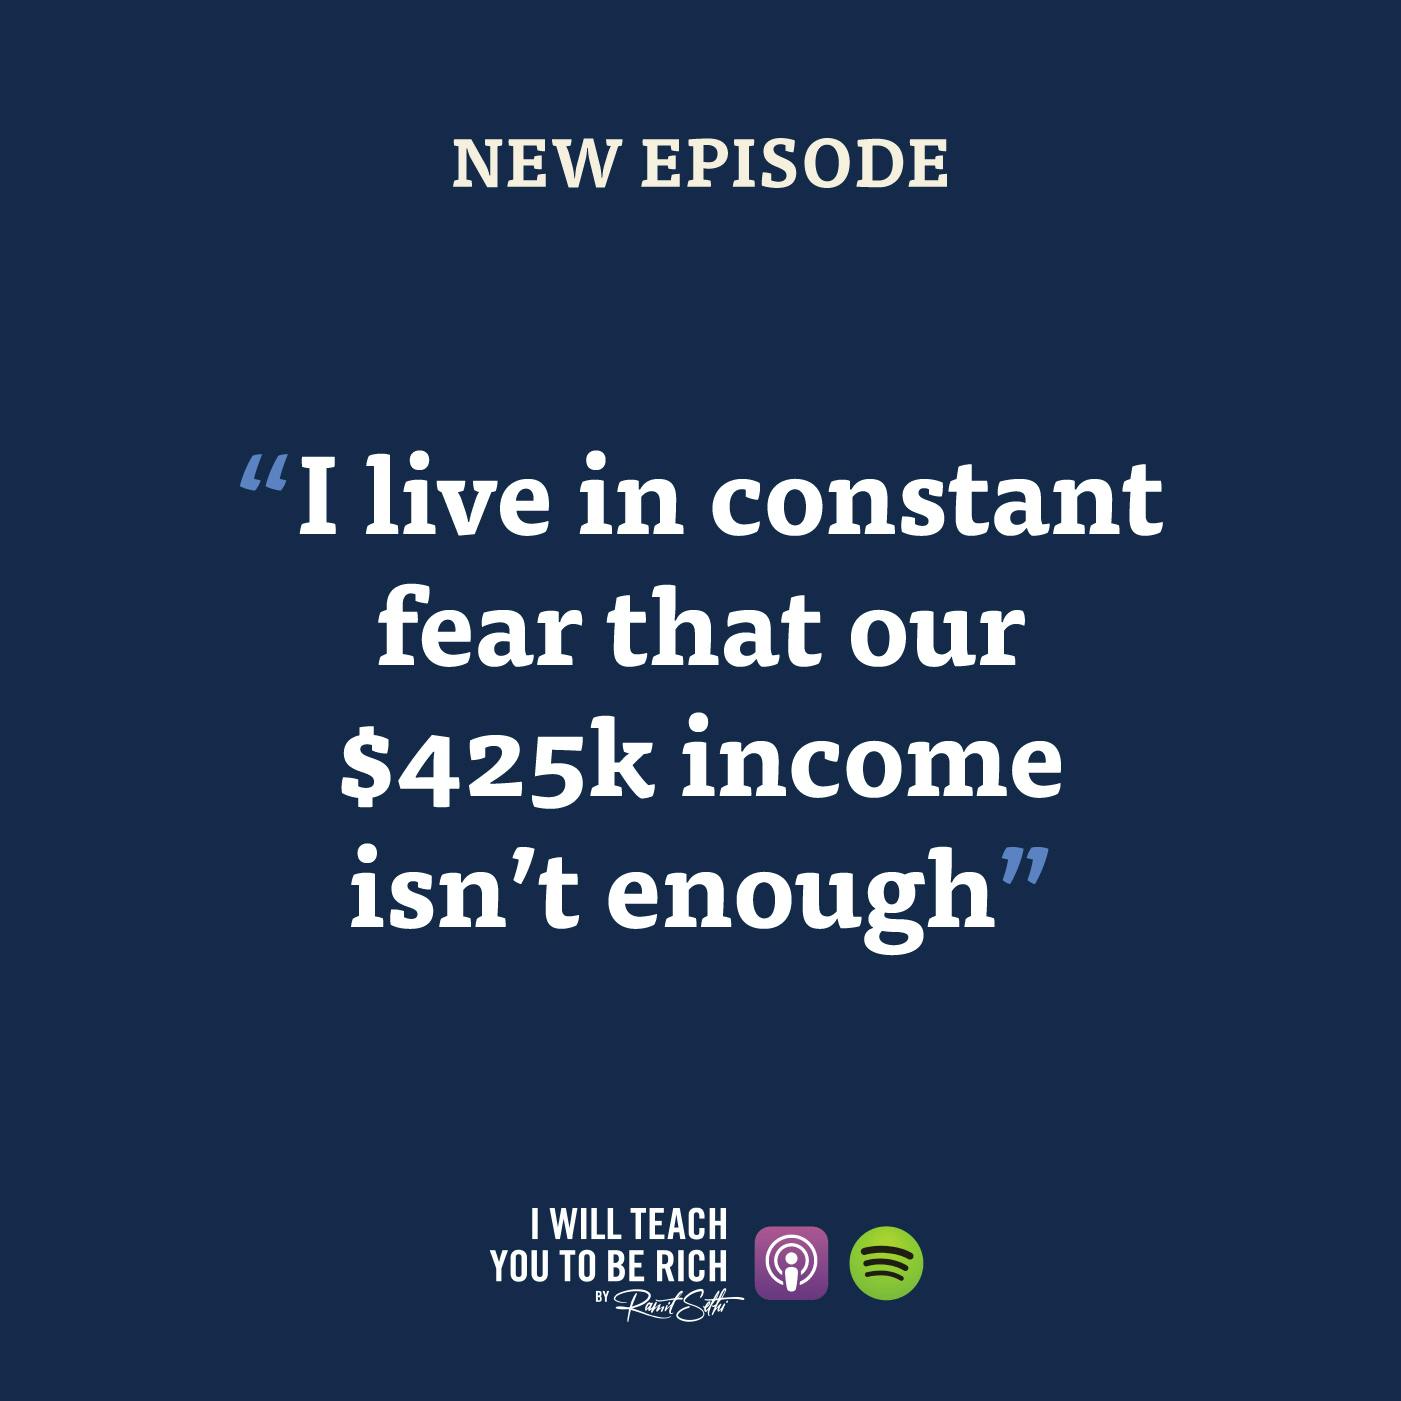 23. “I live in constant fear that our $425k income isn’t enough”